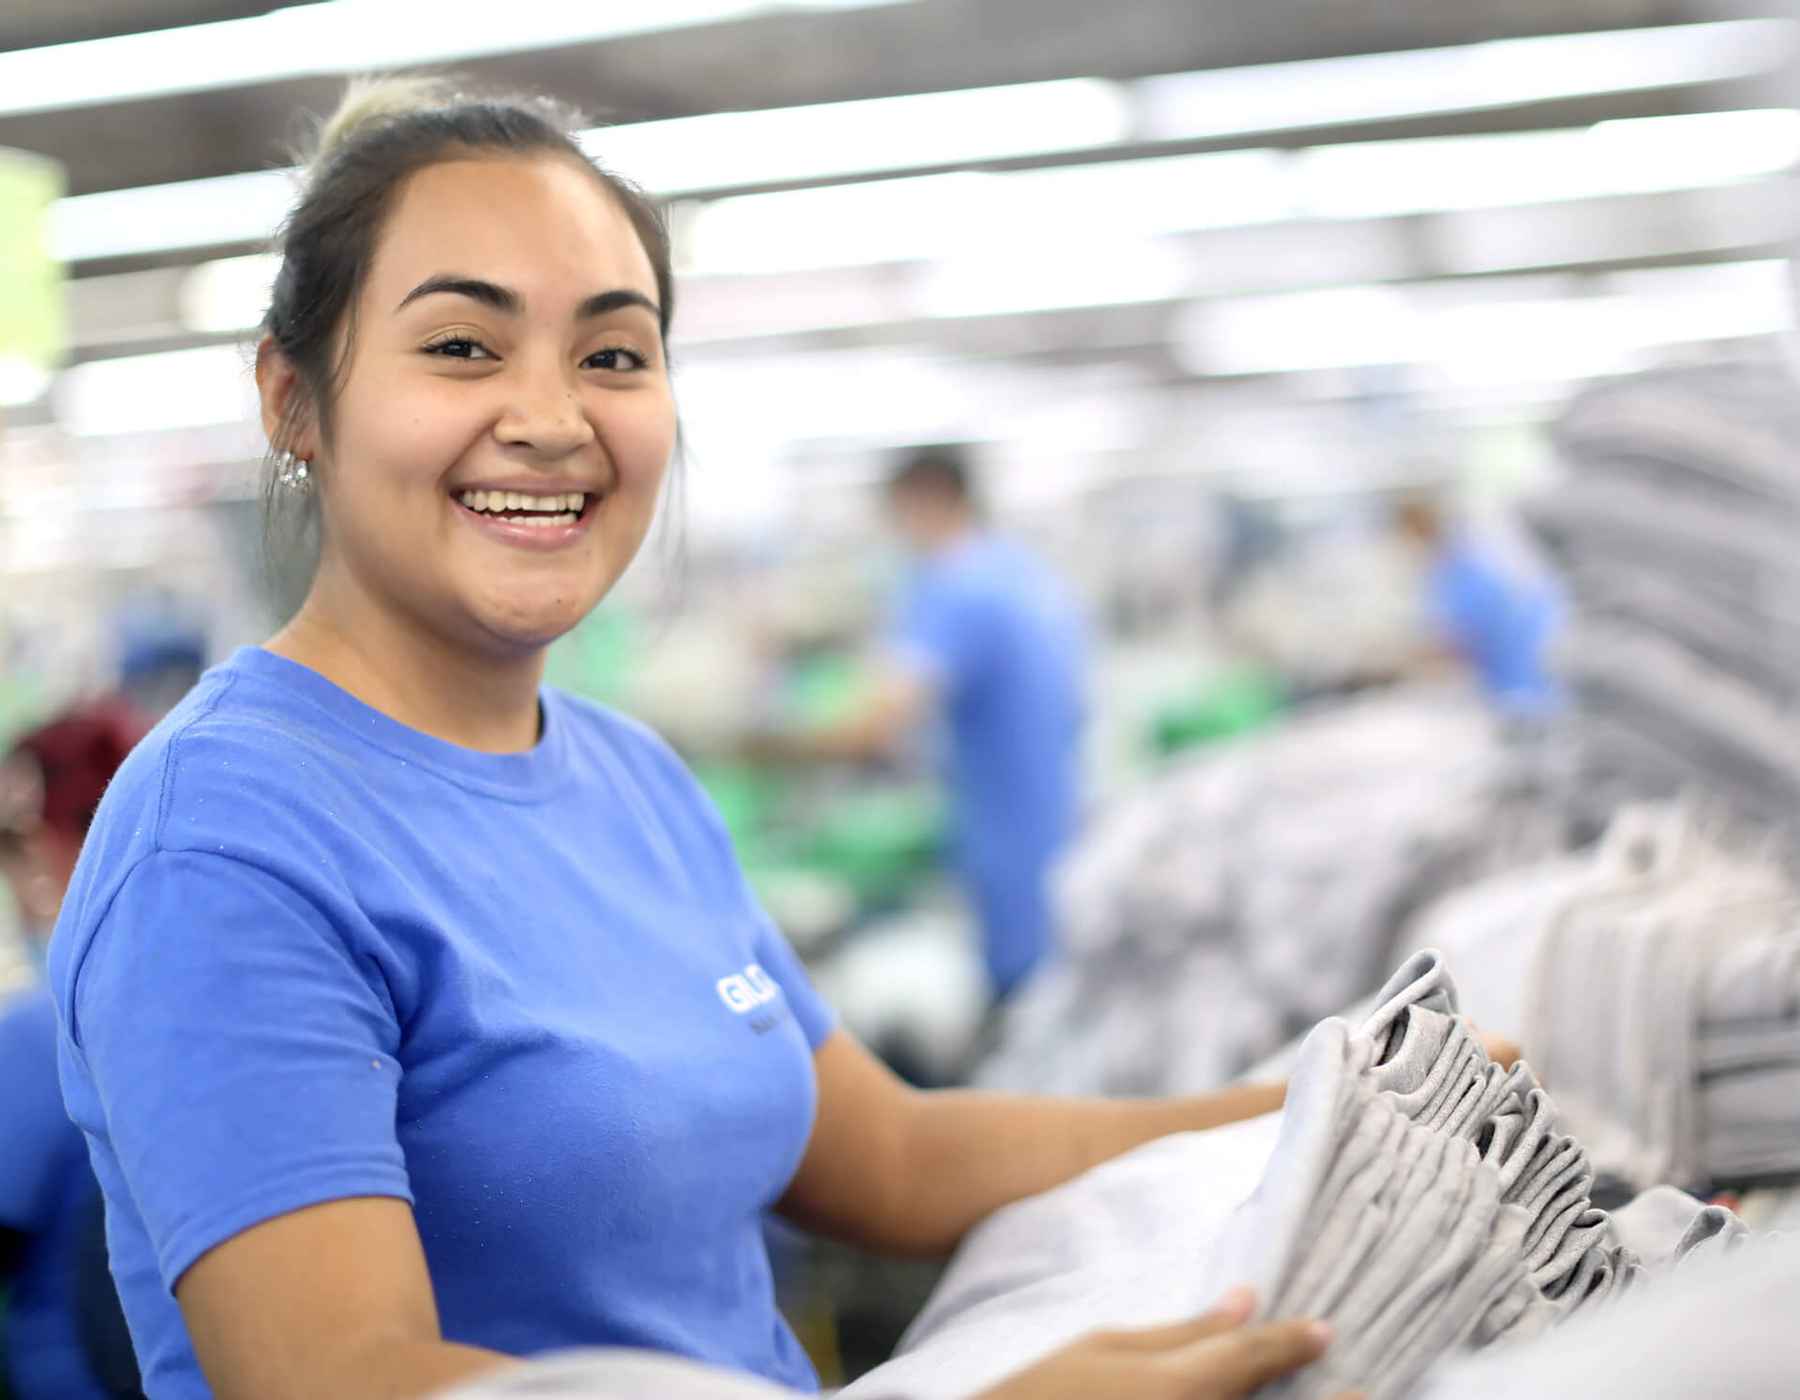 A Gildan sewing employee is smiling at the camera.